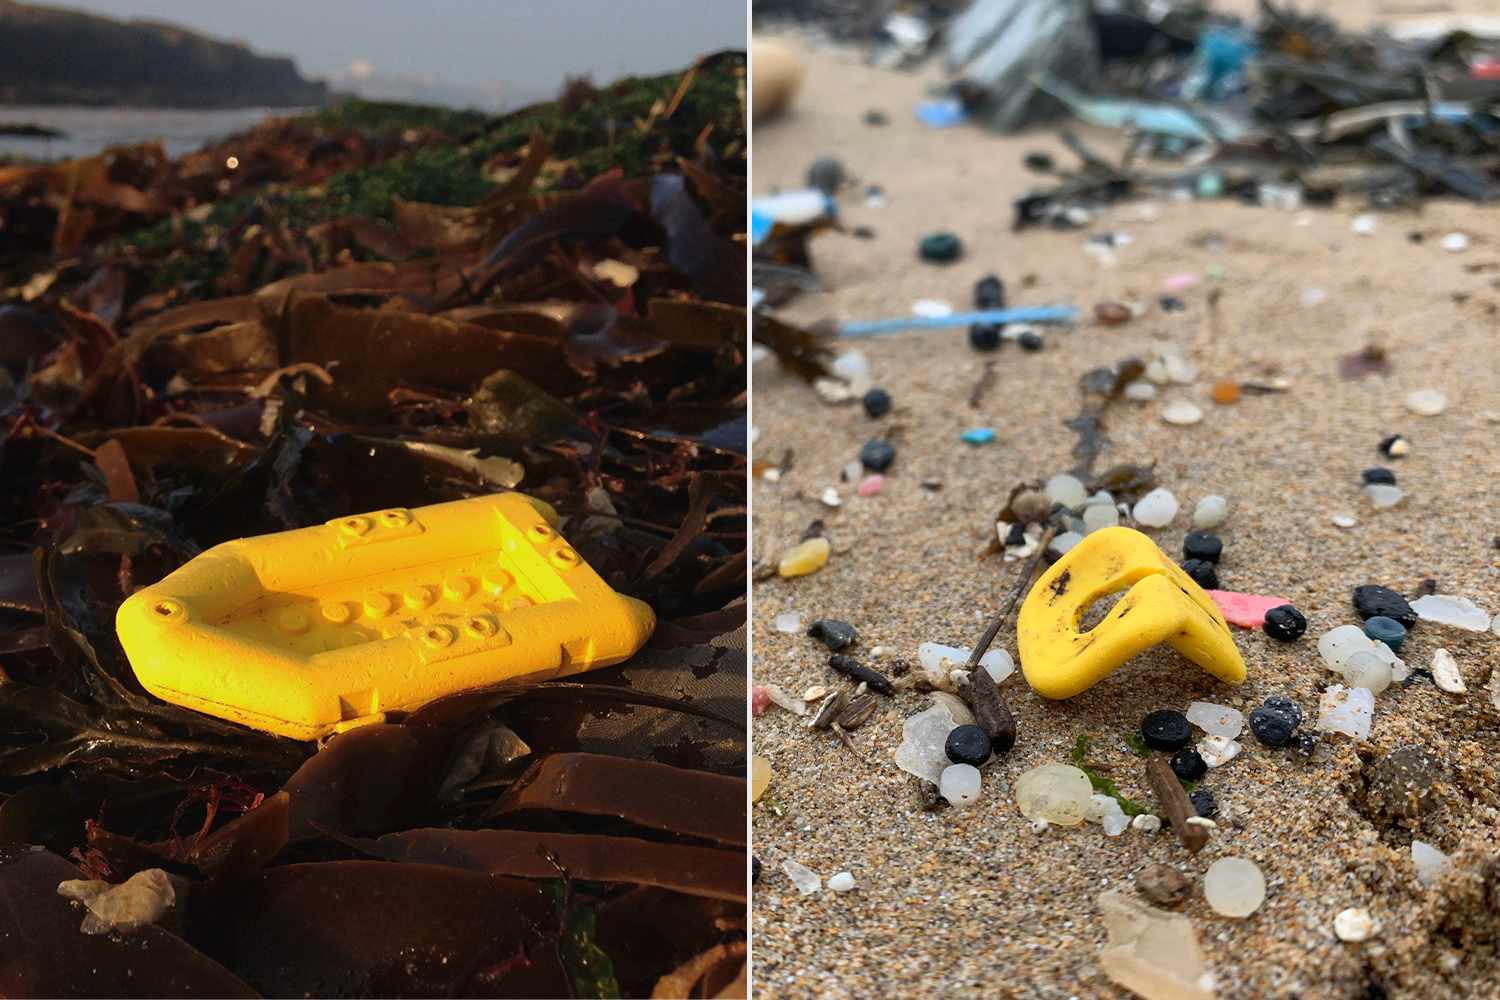 Why Are Thousands of Lego Pieces Washing Up on Beaches? The Answer Lies in a 1997 Cargo Ship Spill (Exclusive)